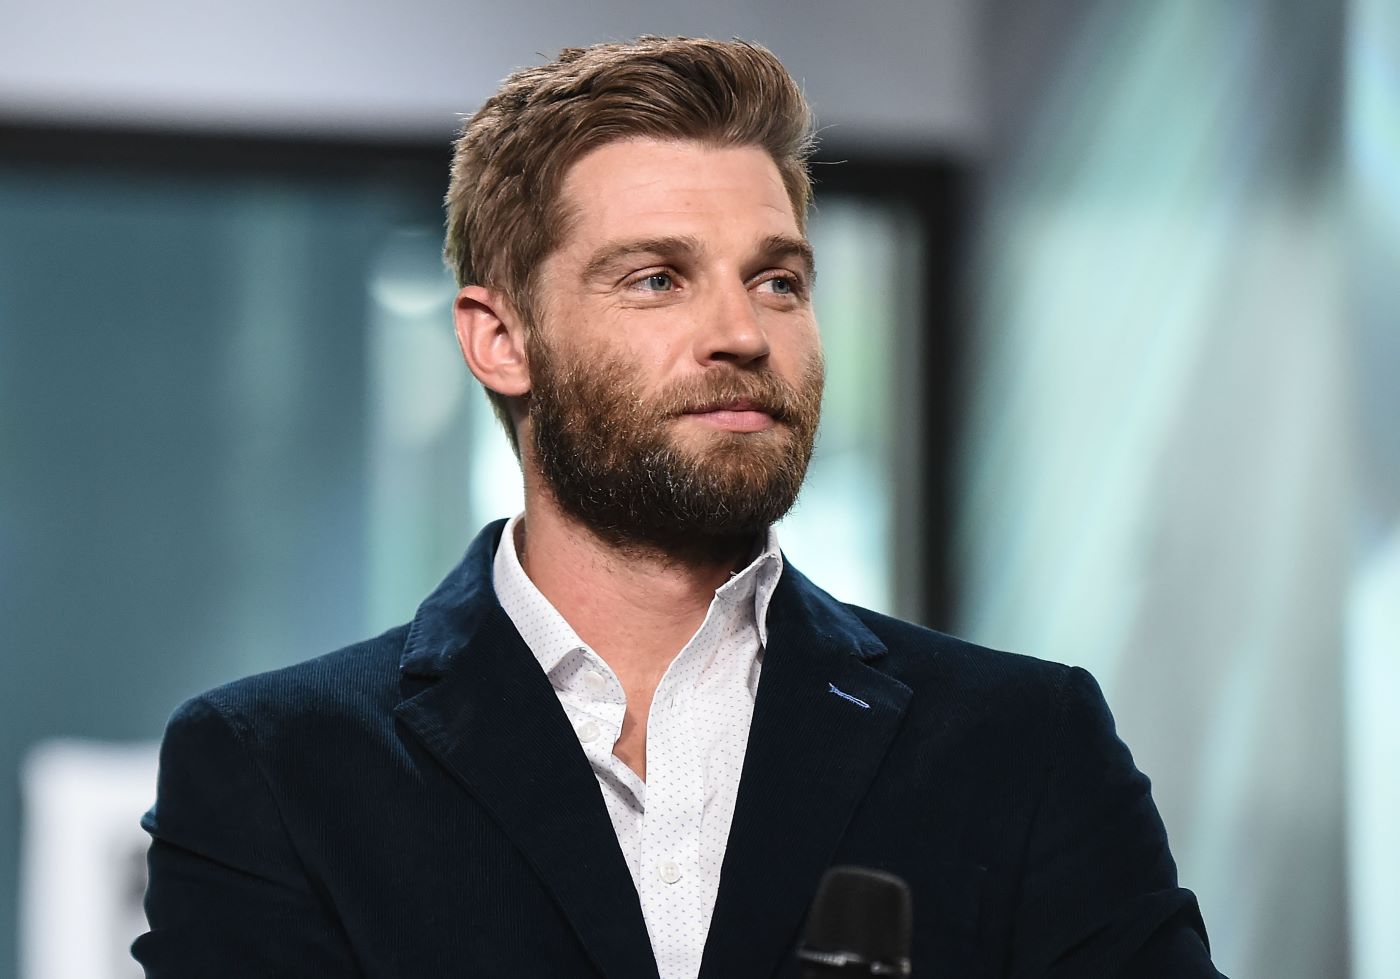 Mike Vogel dressed in a white shirt and a black jacket in front of a very blurred back ground of what looks like a window.